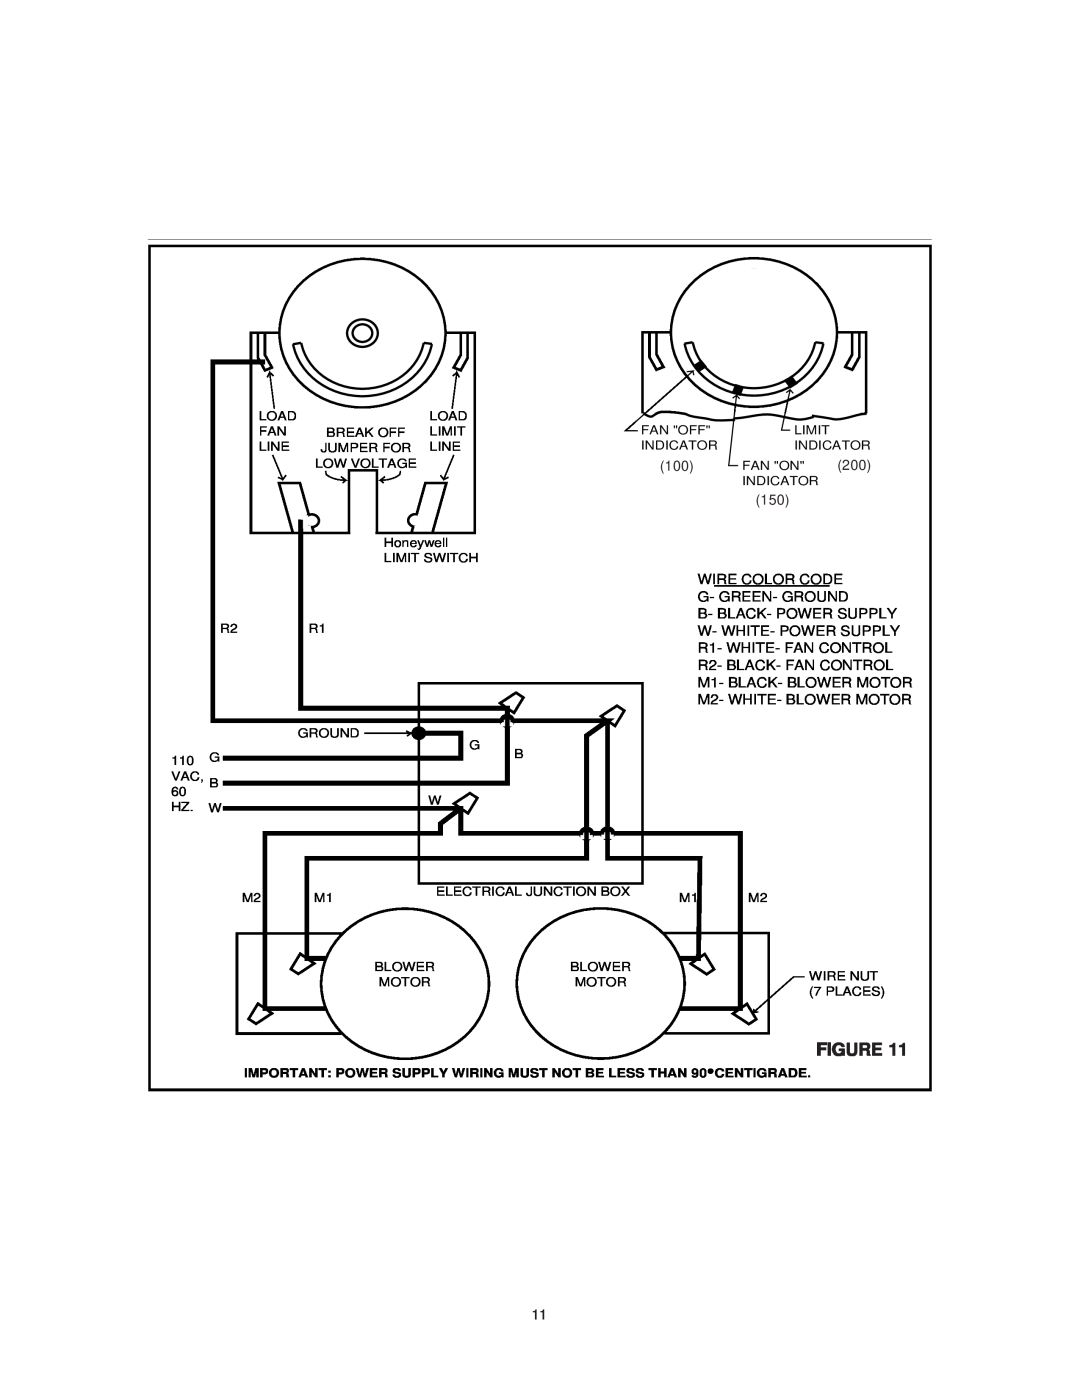 United States Stove 1537M owner manual Wire Color Code G- Green- Ground, R2- BLACK- FAN CONTROL M1- BLACK- BLOWER MOTOR 